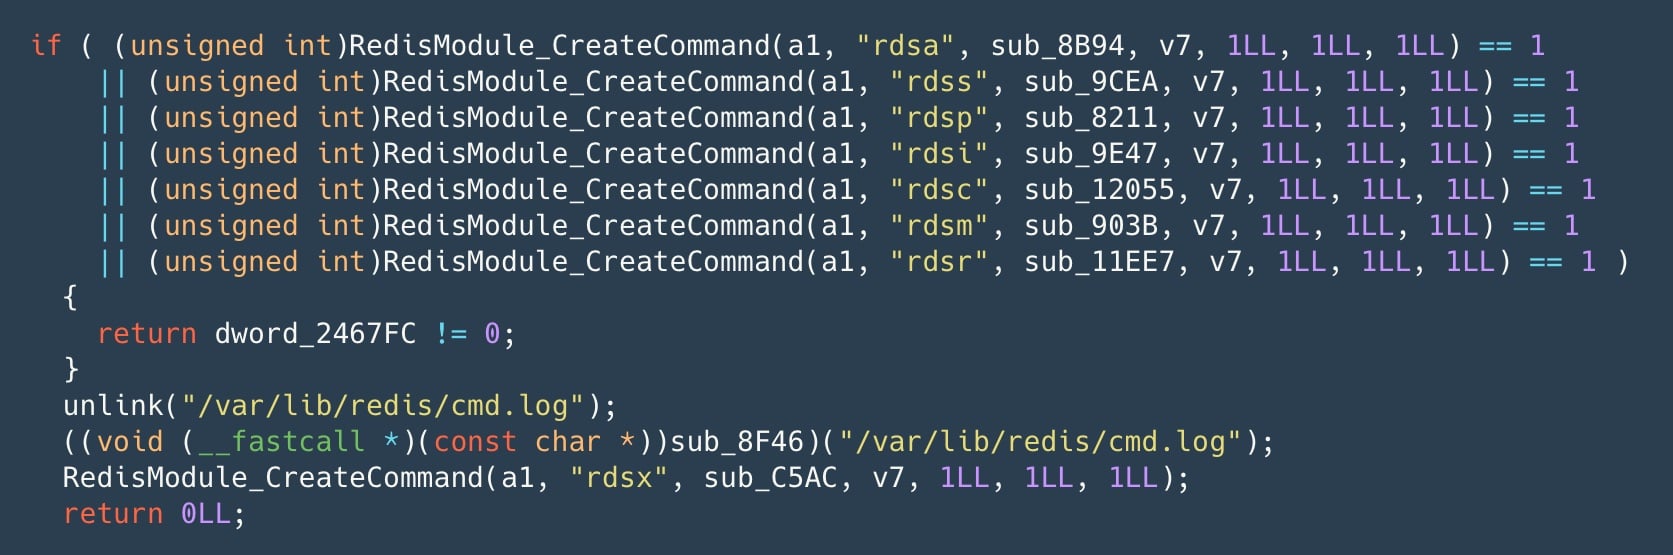 Simulation to some of these commands